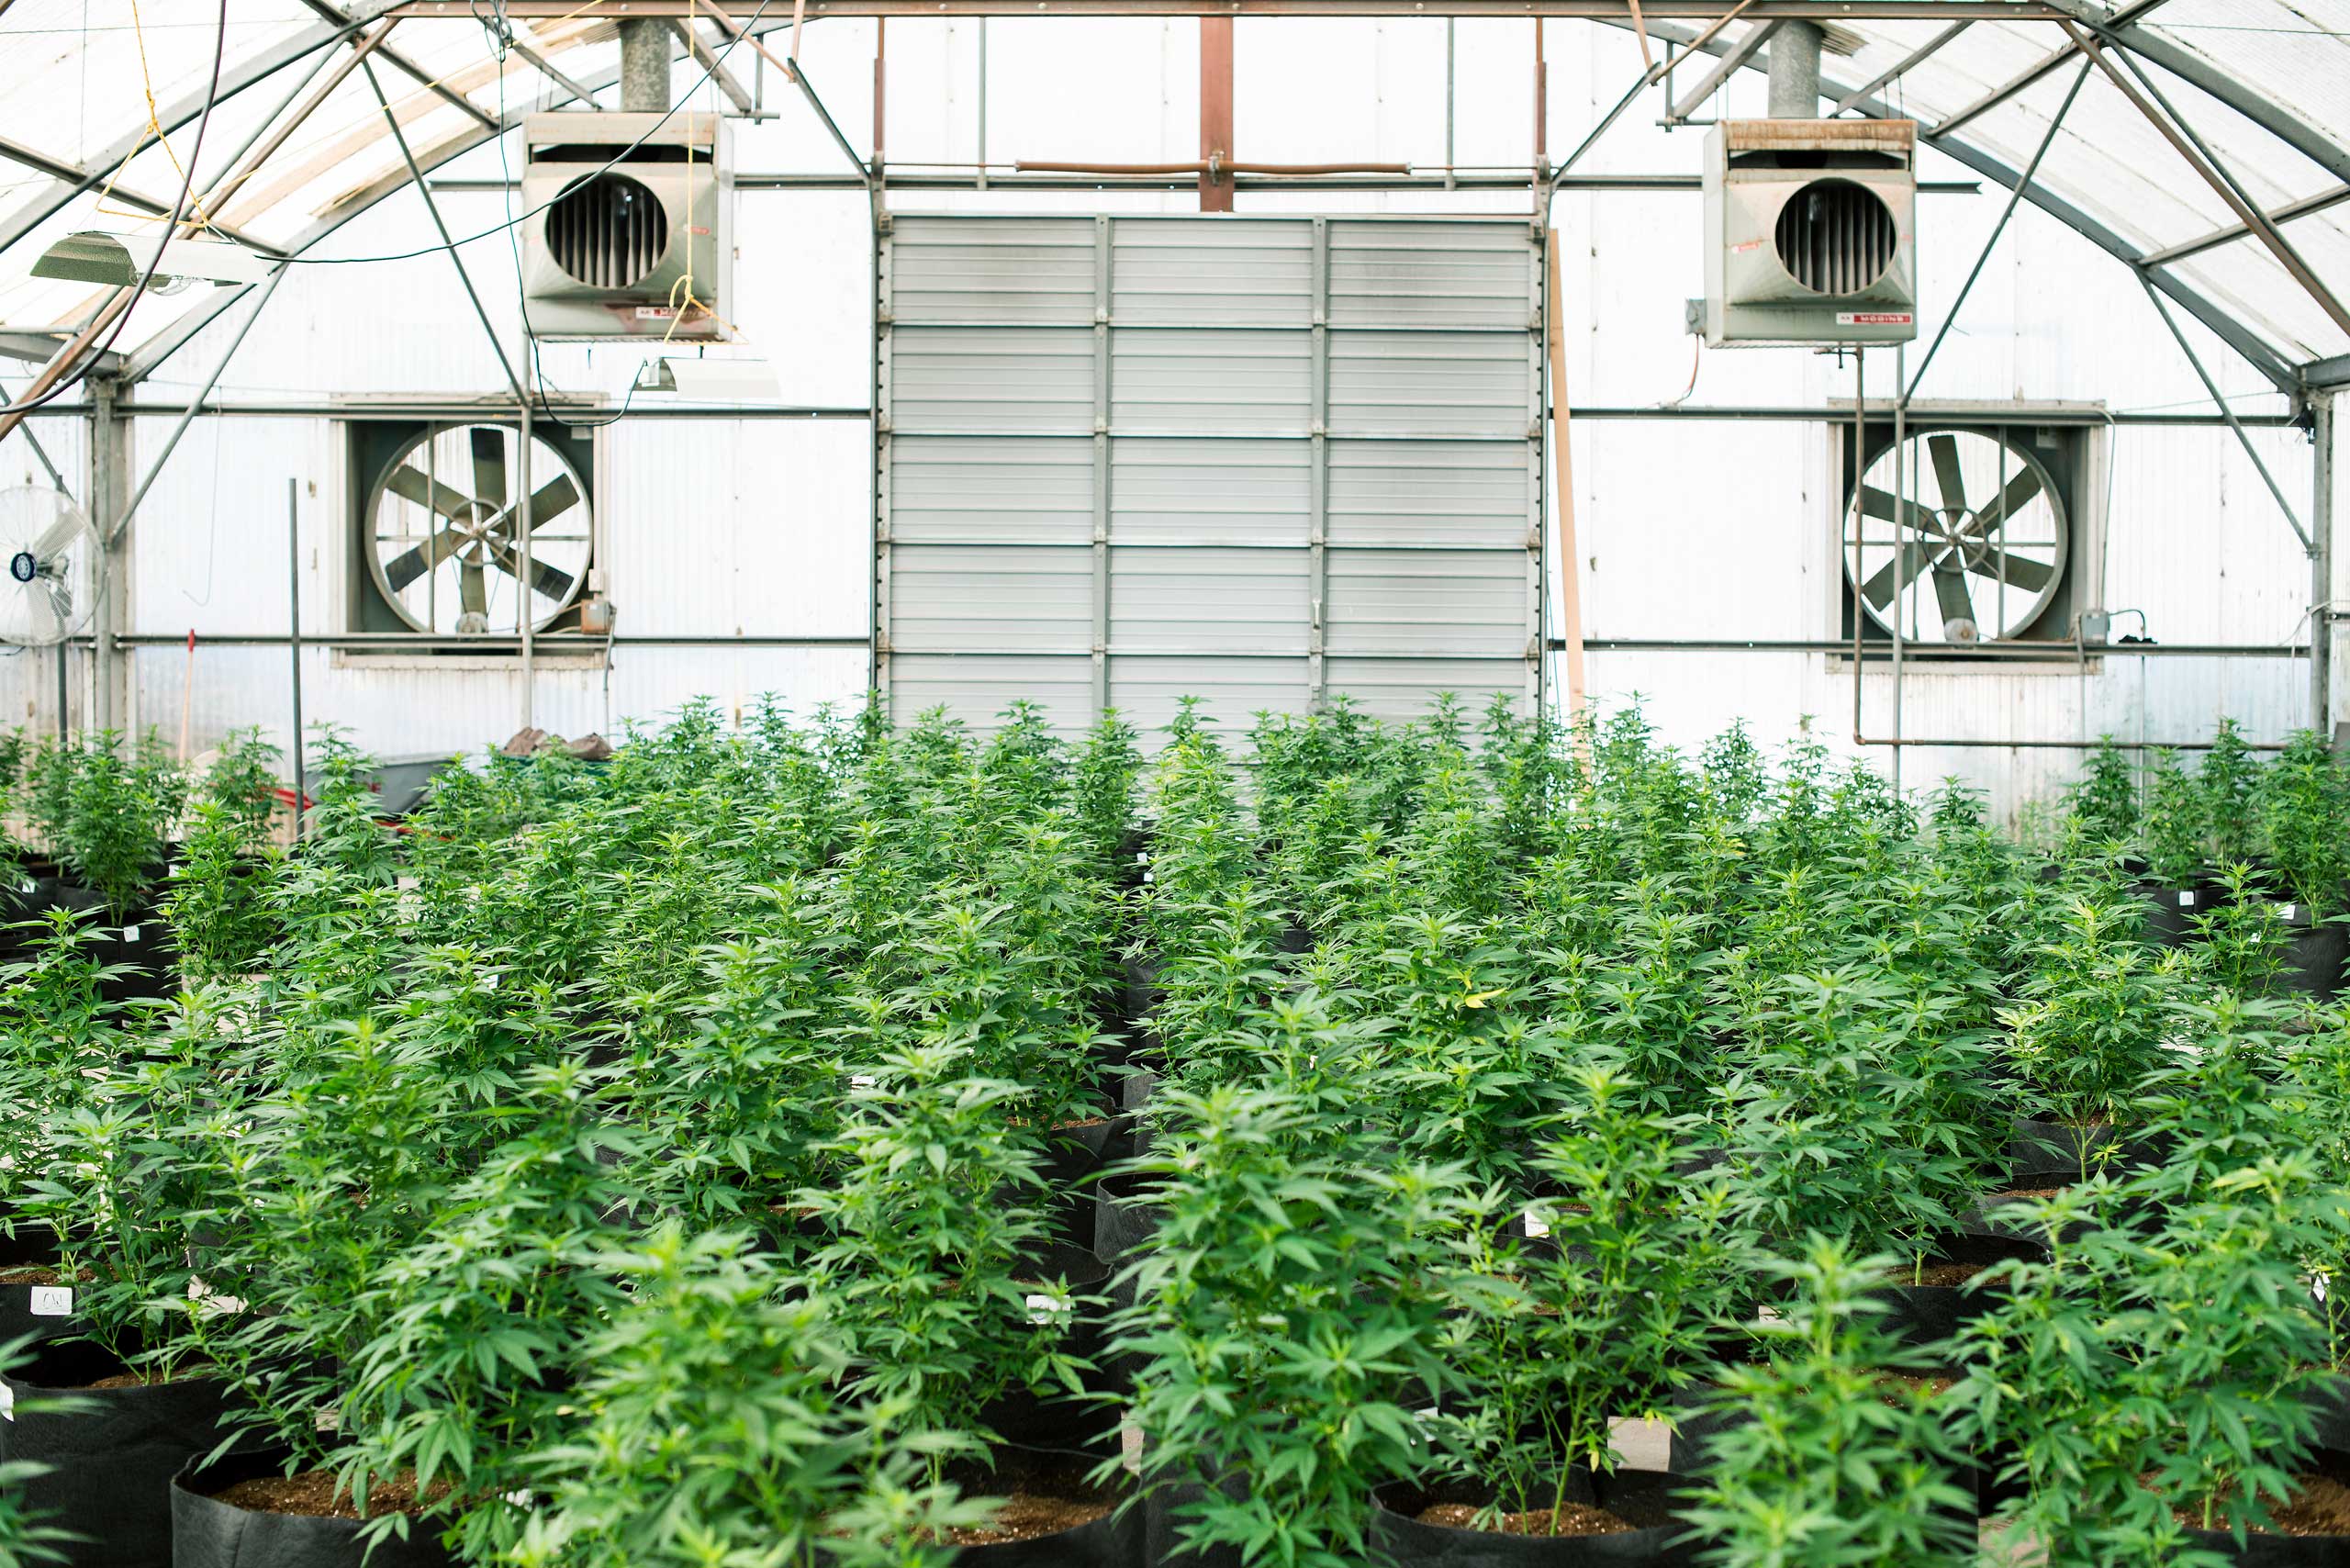 One of the Stanley brother's greenhouses growing cannabis near Wray, Colo. on Sept. 22, 2014.